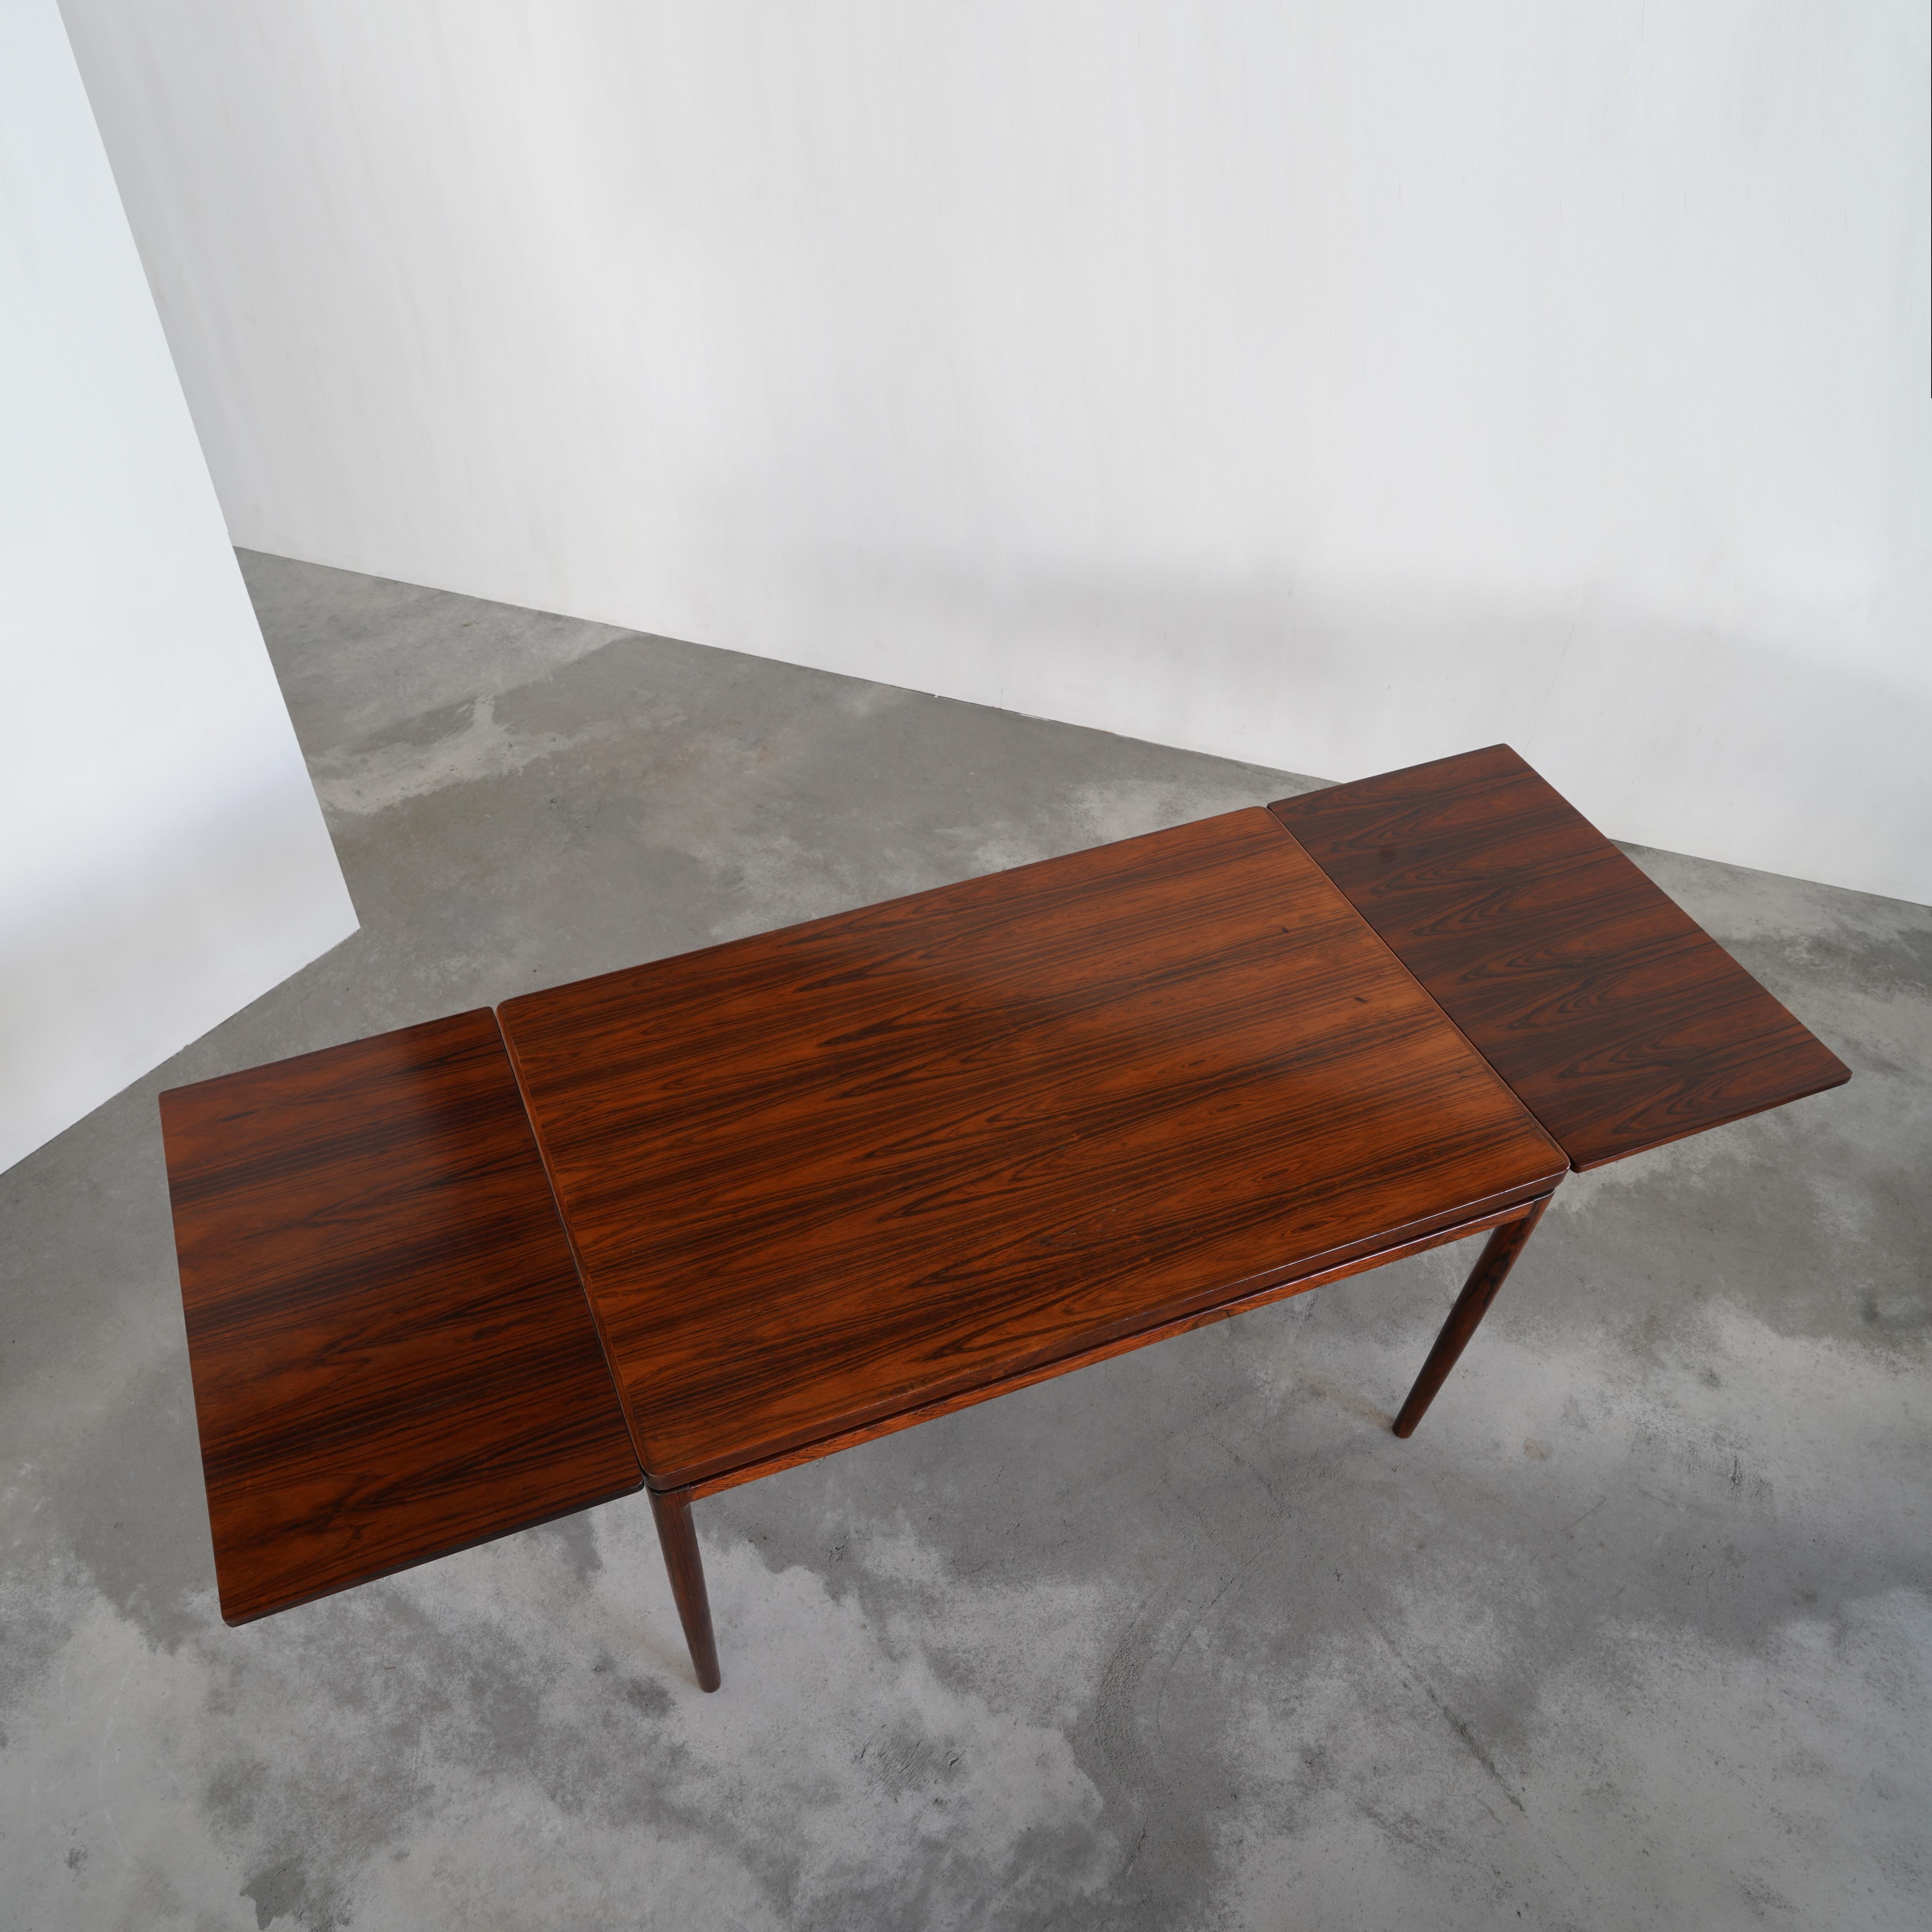 A striking dining table designed by Johannes Andersen for Christian Linneberg Møbelfabrik. 1960’s.

 The overall design is pretty straightforward, but the expressive grain of the rosewood and elegant details like the slightly tapered legs make it